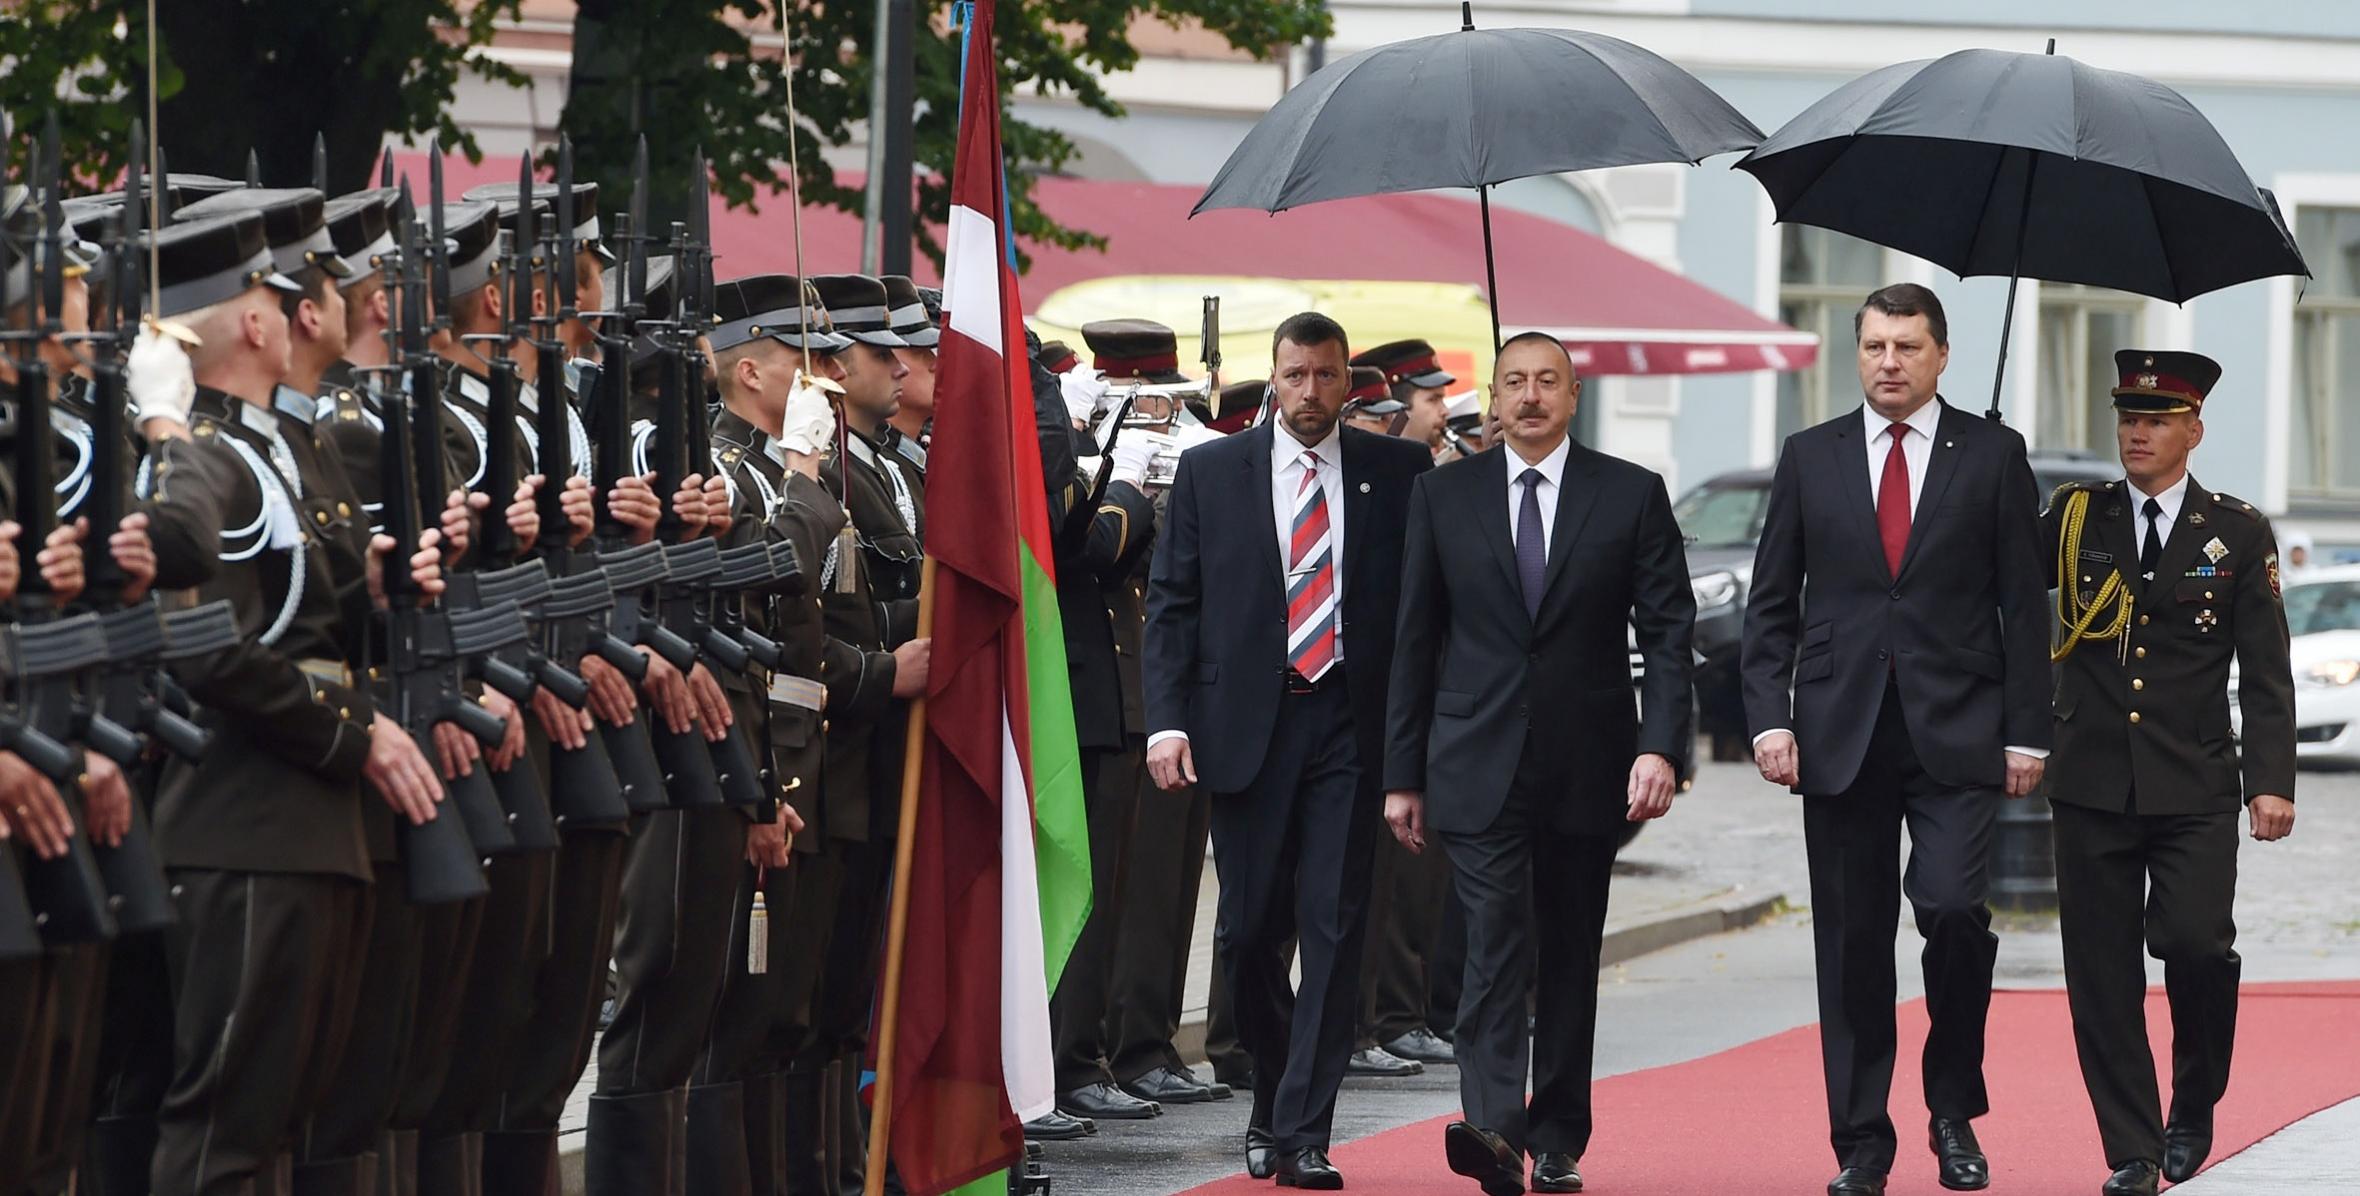 Official welcome ceremony was held for President Ilham Aliyev in Riga